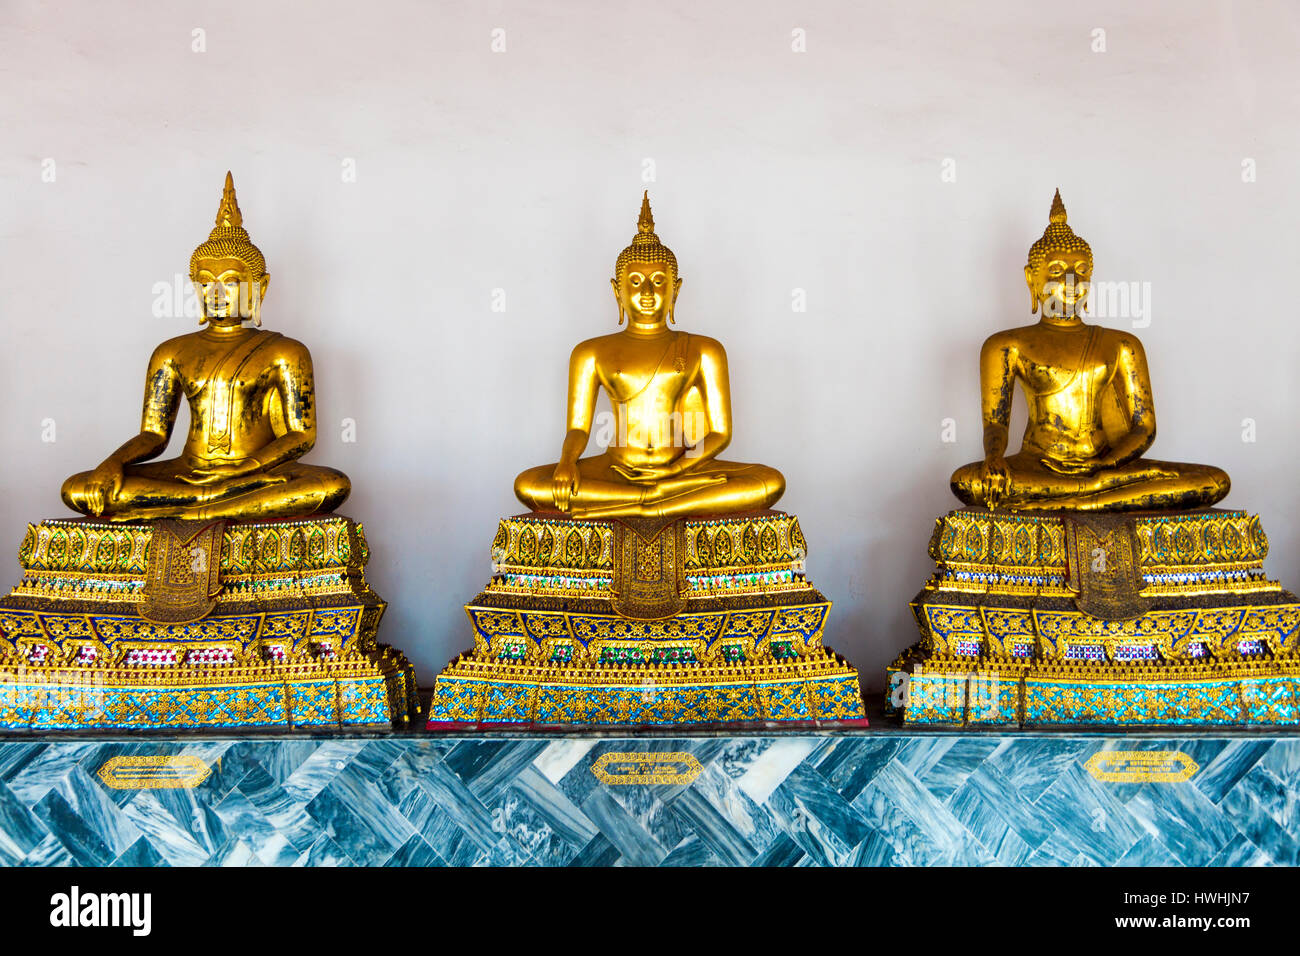 Row of praying golden buddha statues at Wat Pho Temple (Temple of the Reclining Buddha) in Bangkok, Thailand Stock Photo